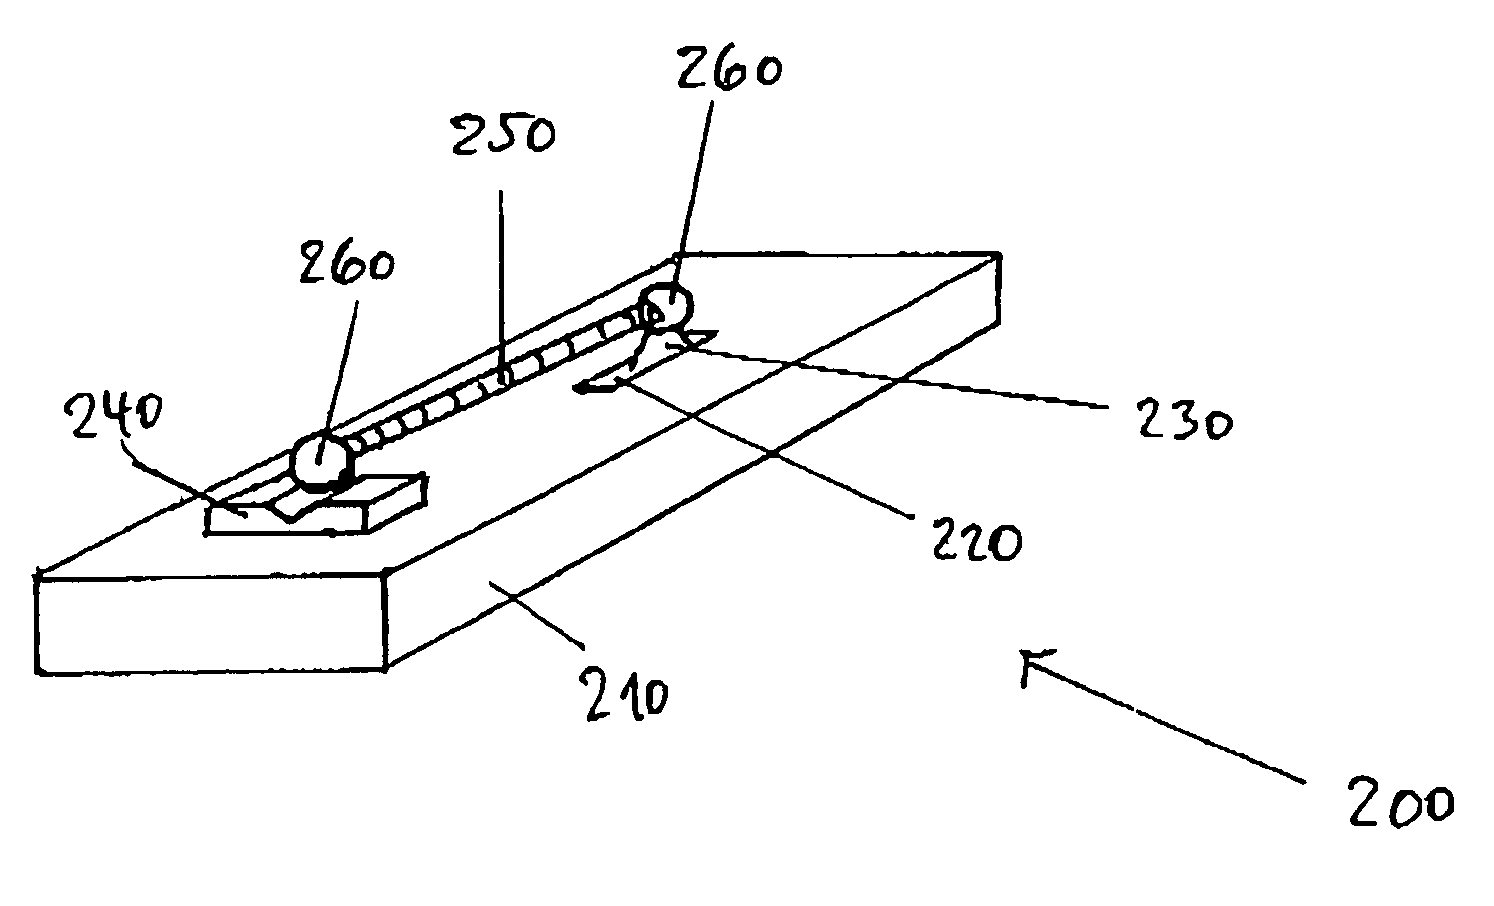 Variable test object and holder for variable test objects